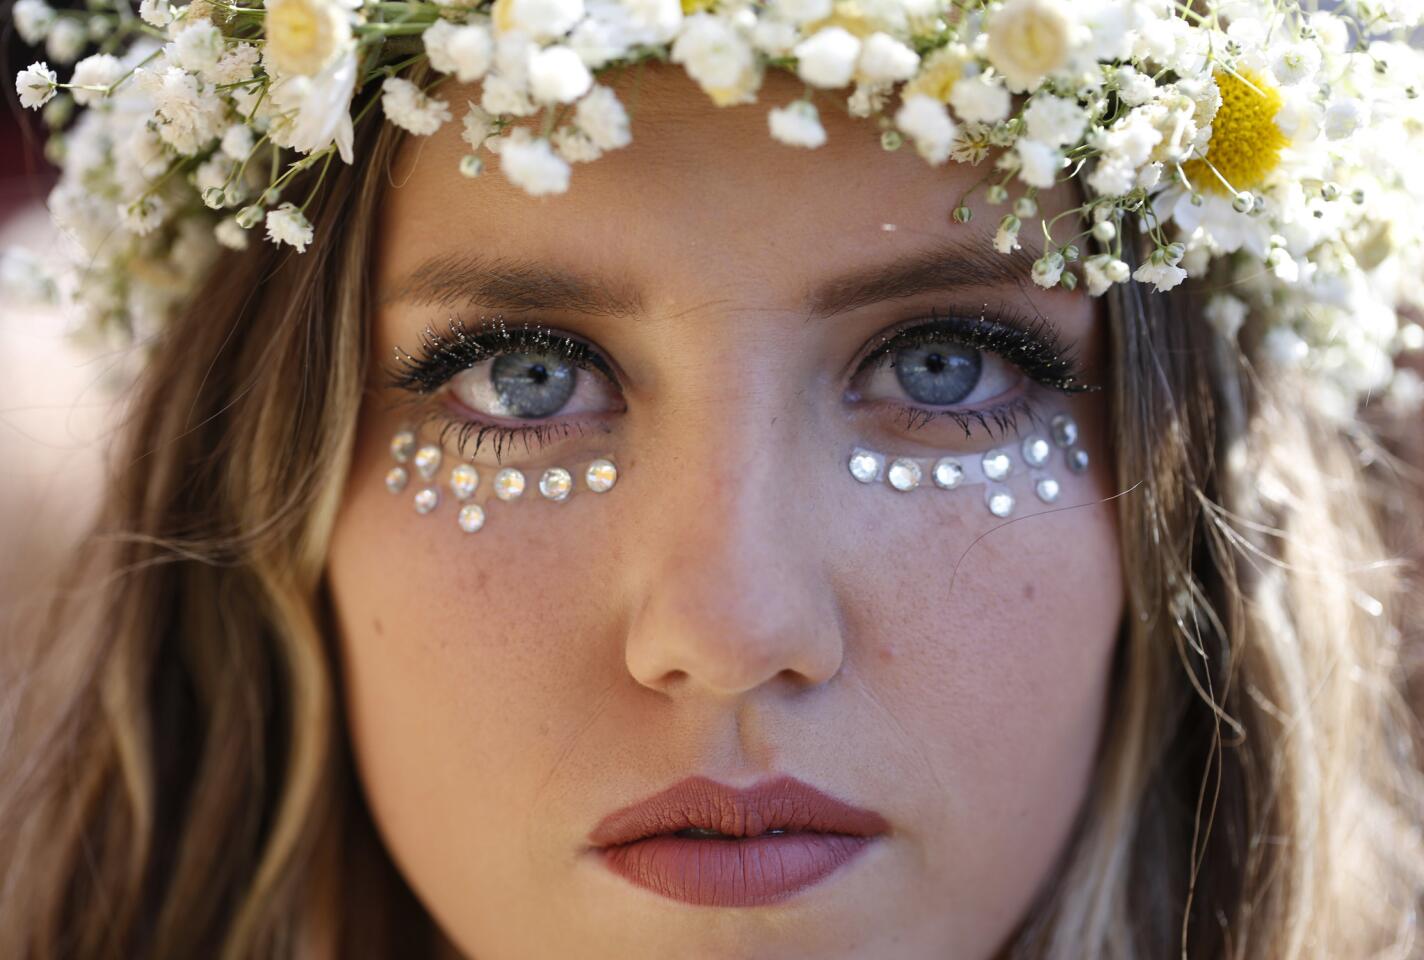 Clarissa Swikard, 18, from San Diego, sports jewels and a flower crown on Day 3 of the Coachella Valley Music and Arts Festival in Indio, 2016.